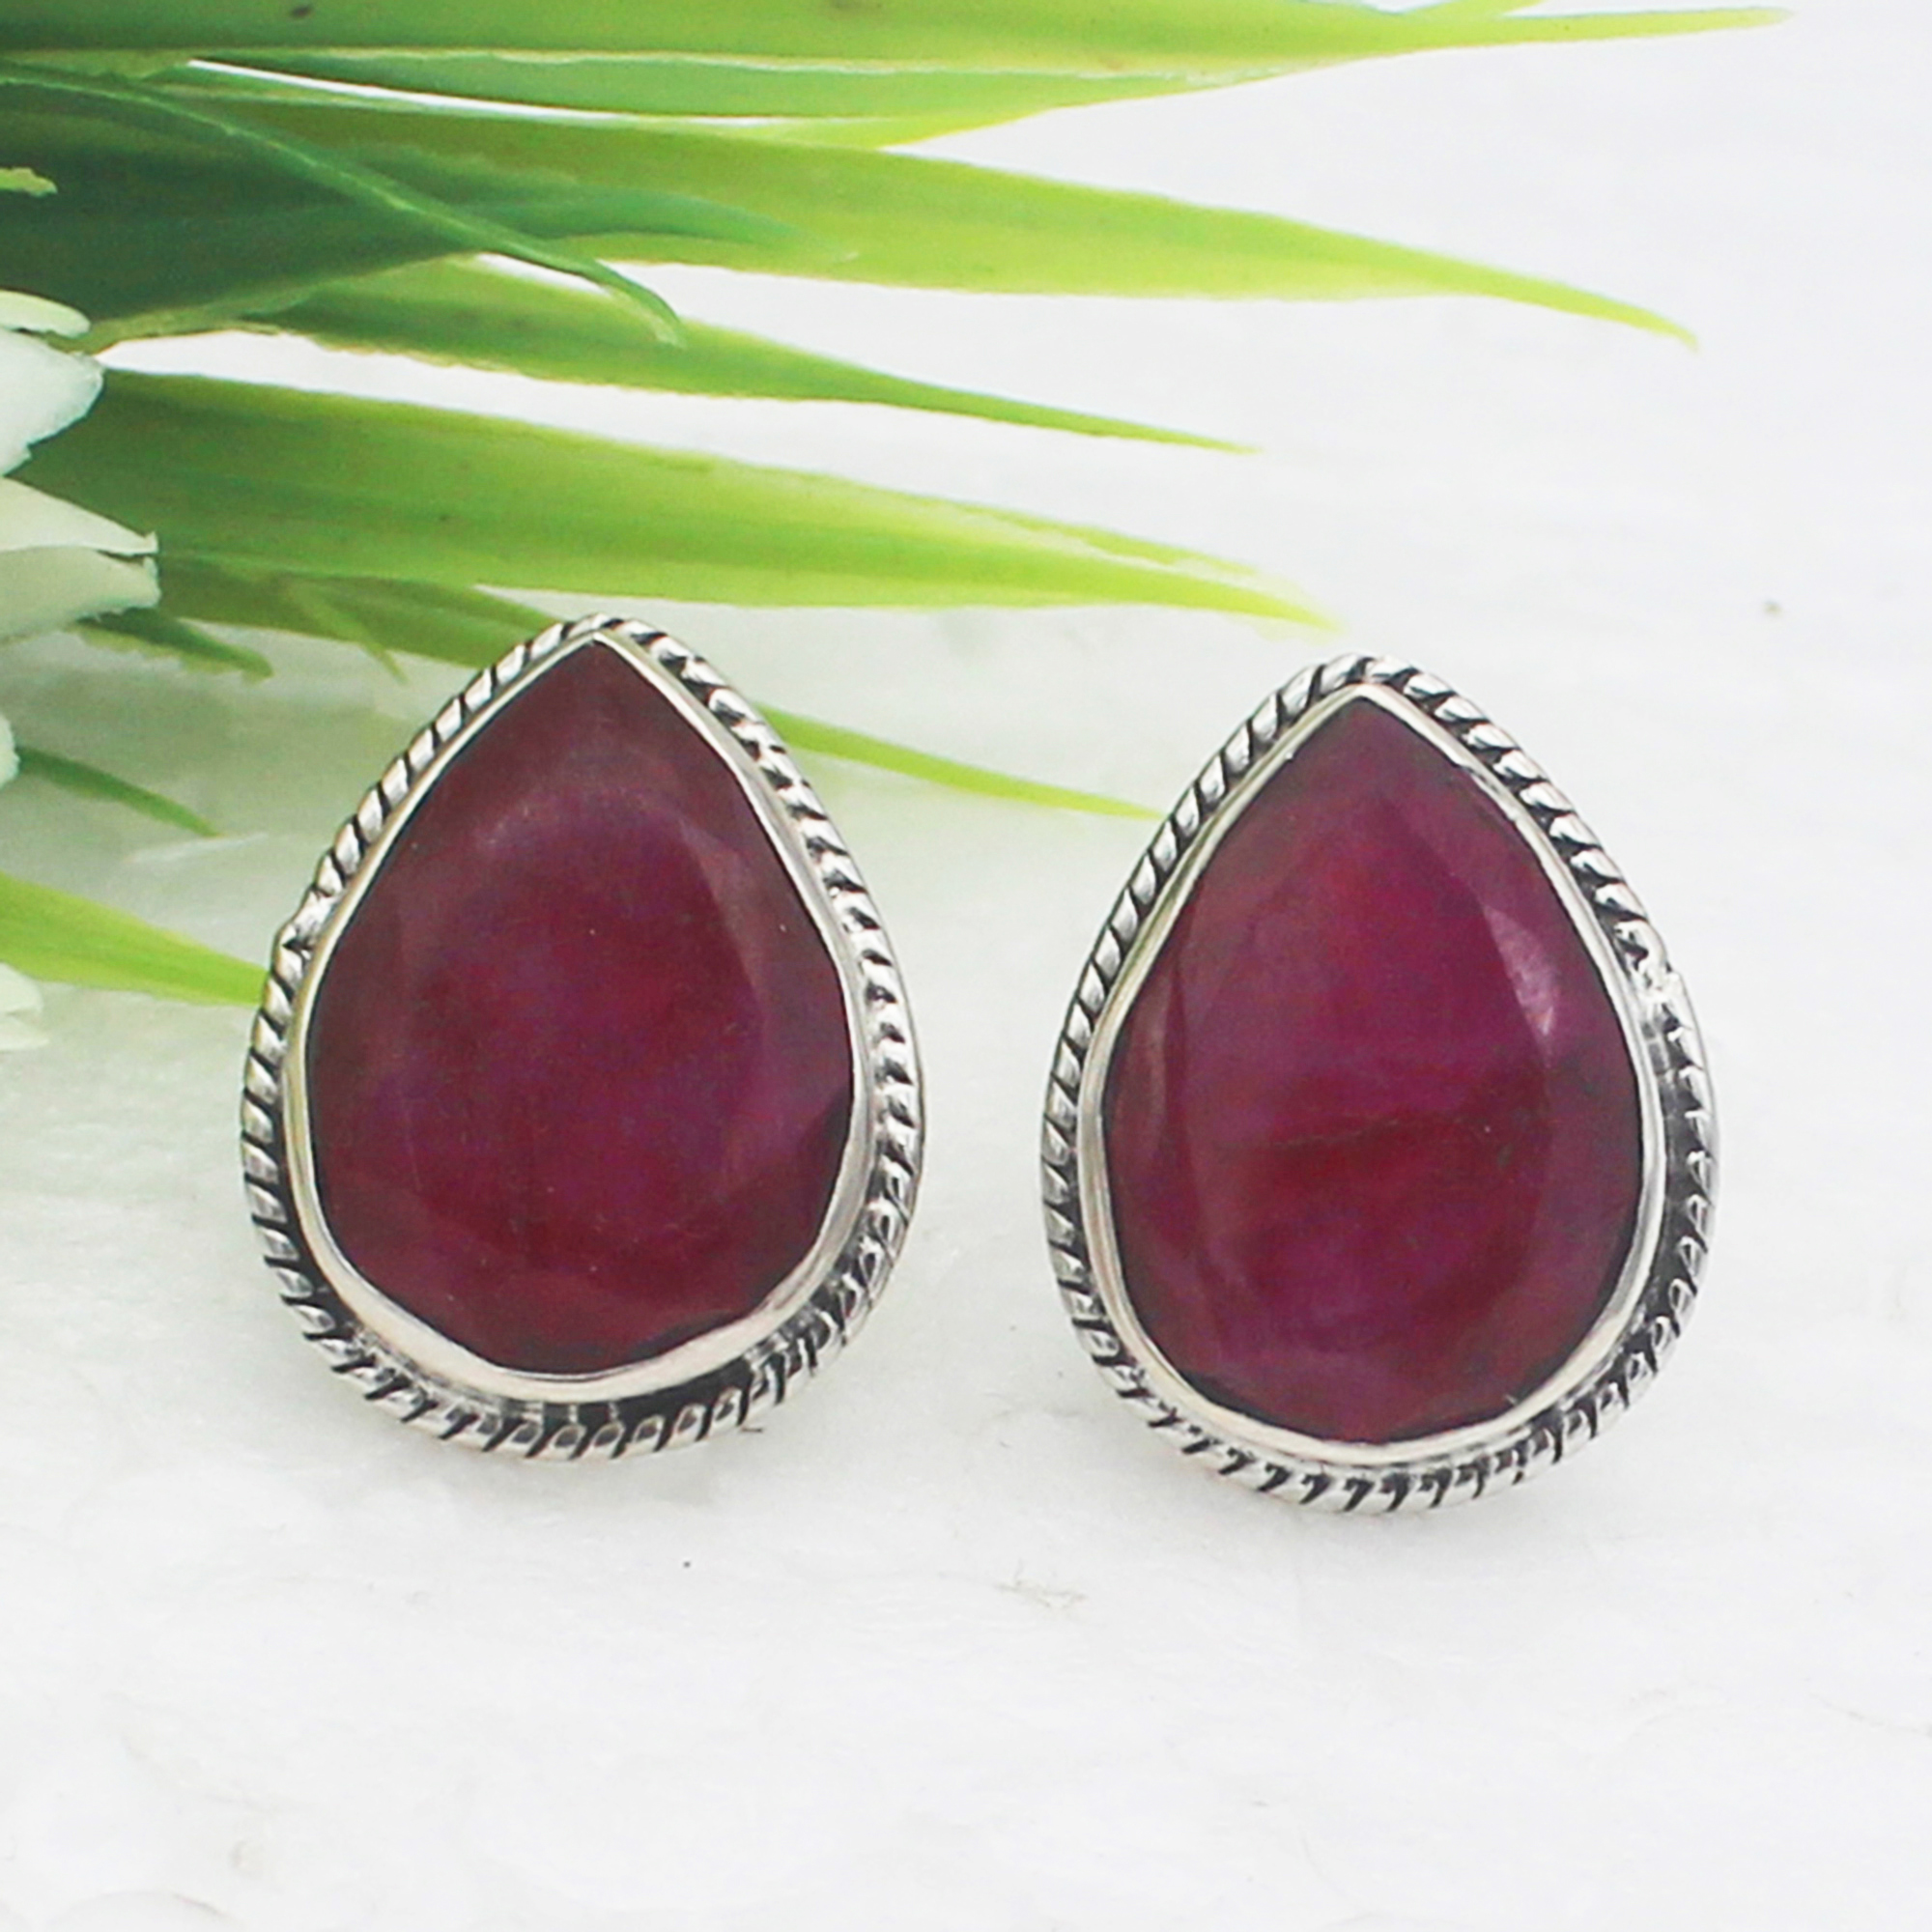 Ruby Earring Designs: Shop for Trendy Styles at Best Price Online